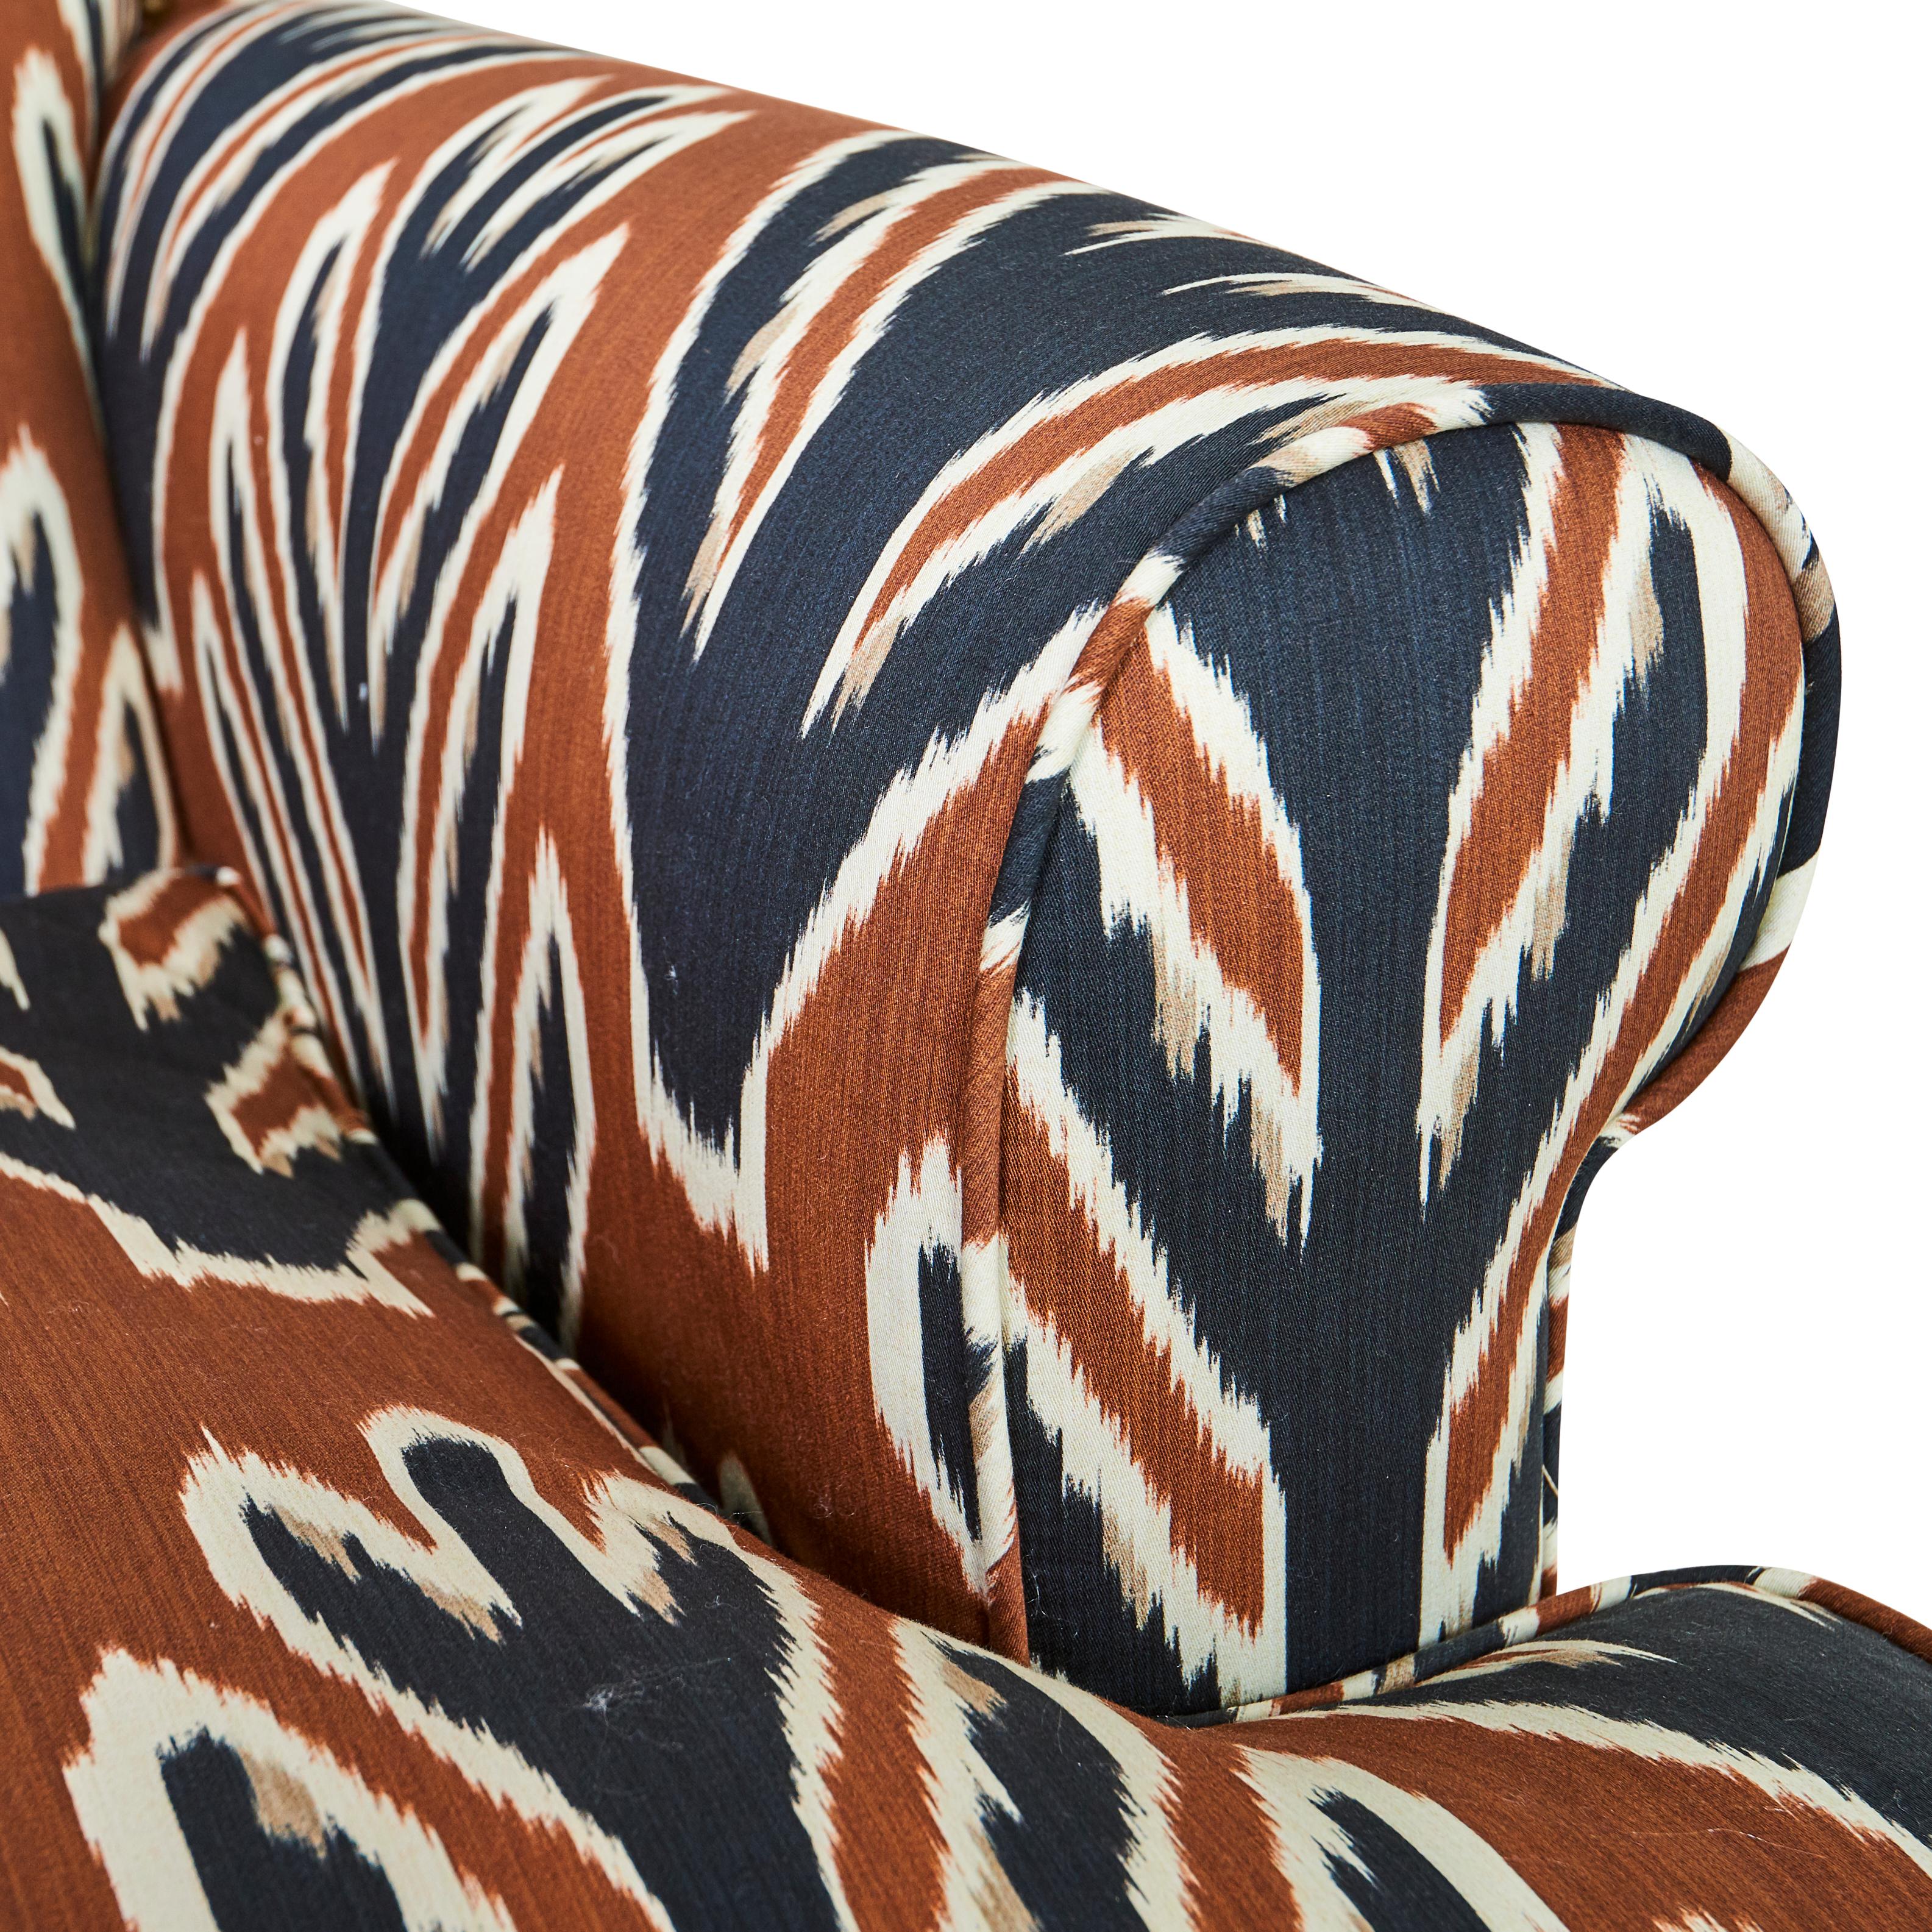 This arm chair is upholstered in Johnson Hartig/Libertine for Schumacher Bodhi Tree fabric in Brown&Black (178562).

